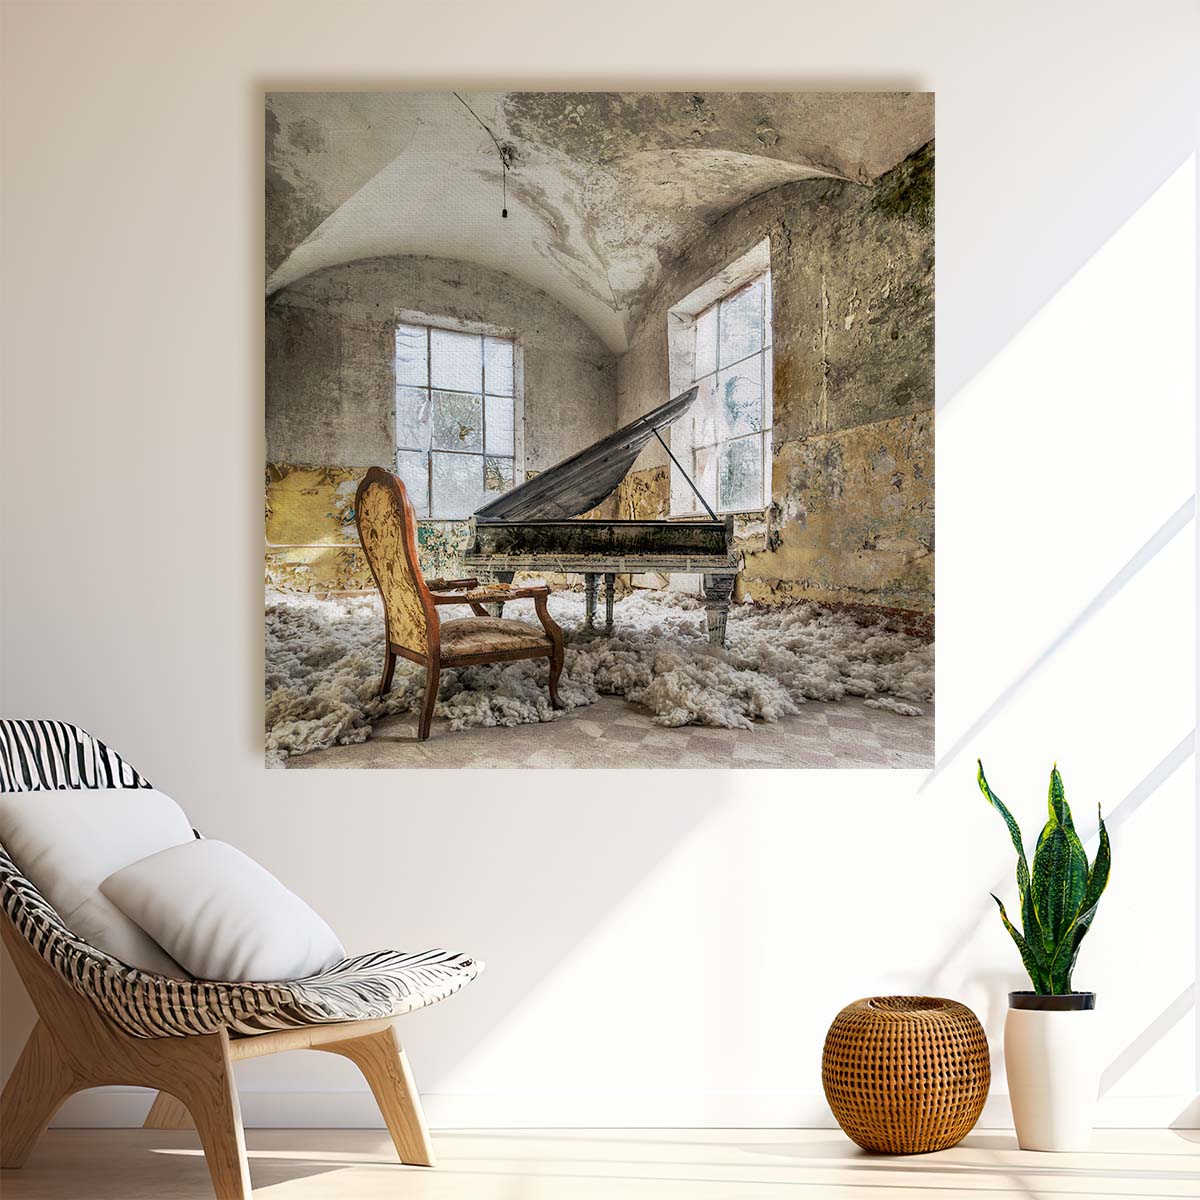 Abandoned Concert Hall Vintage Piano Decay Photography Wall Art by Luxuriance Designs. Made in USA.